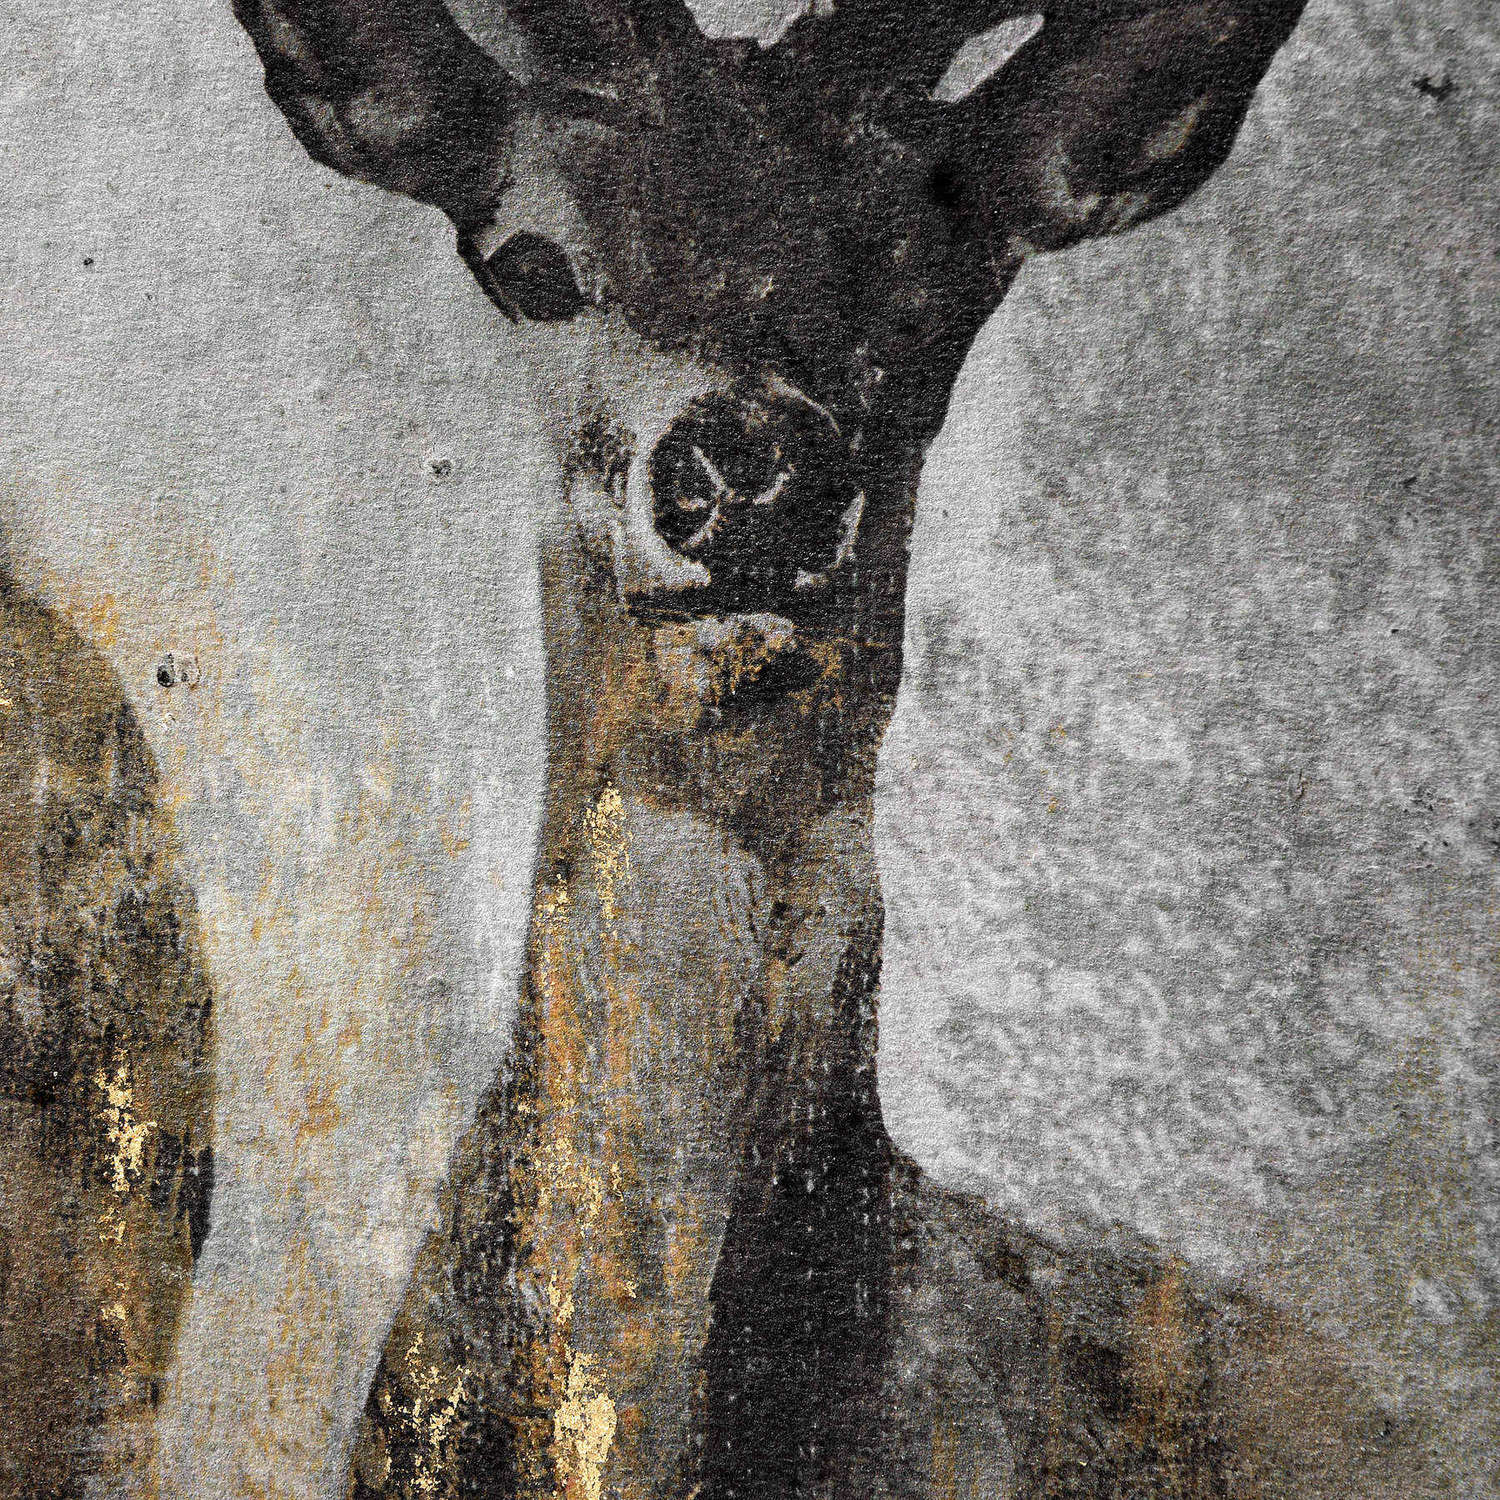 Large Curious Stag Painting on Cement Board with Frame - Image 2